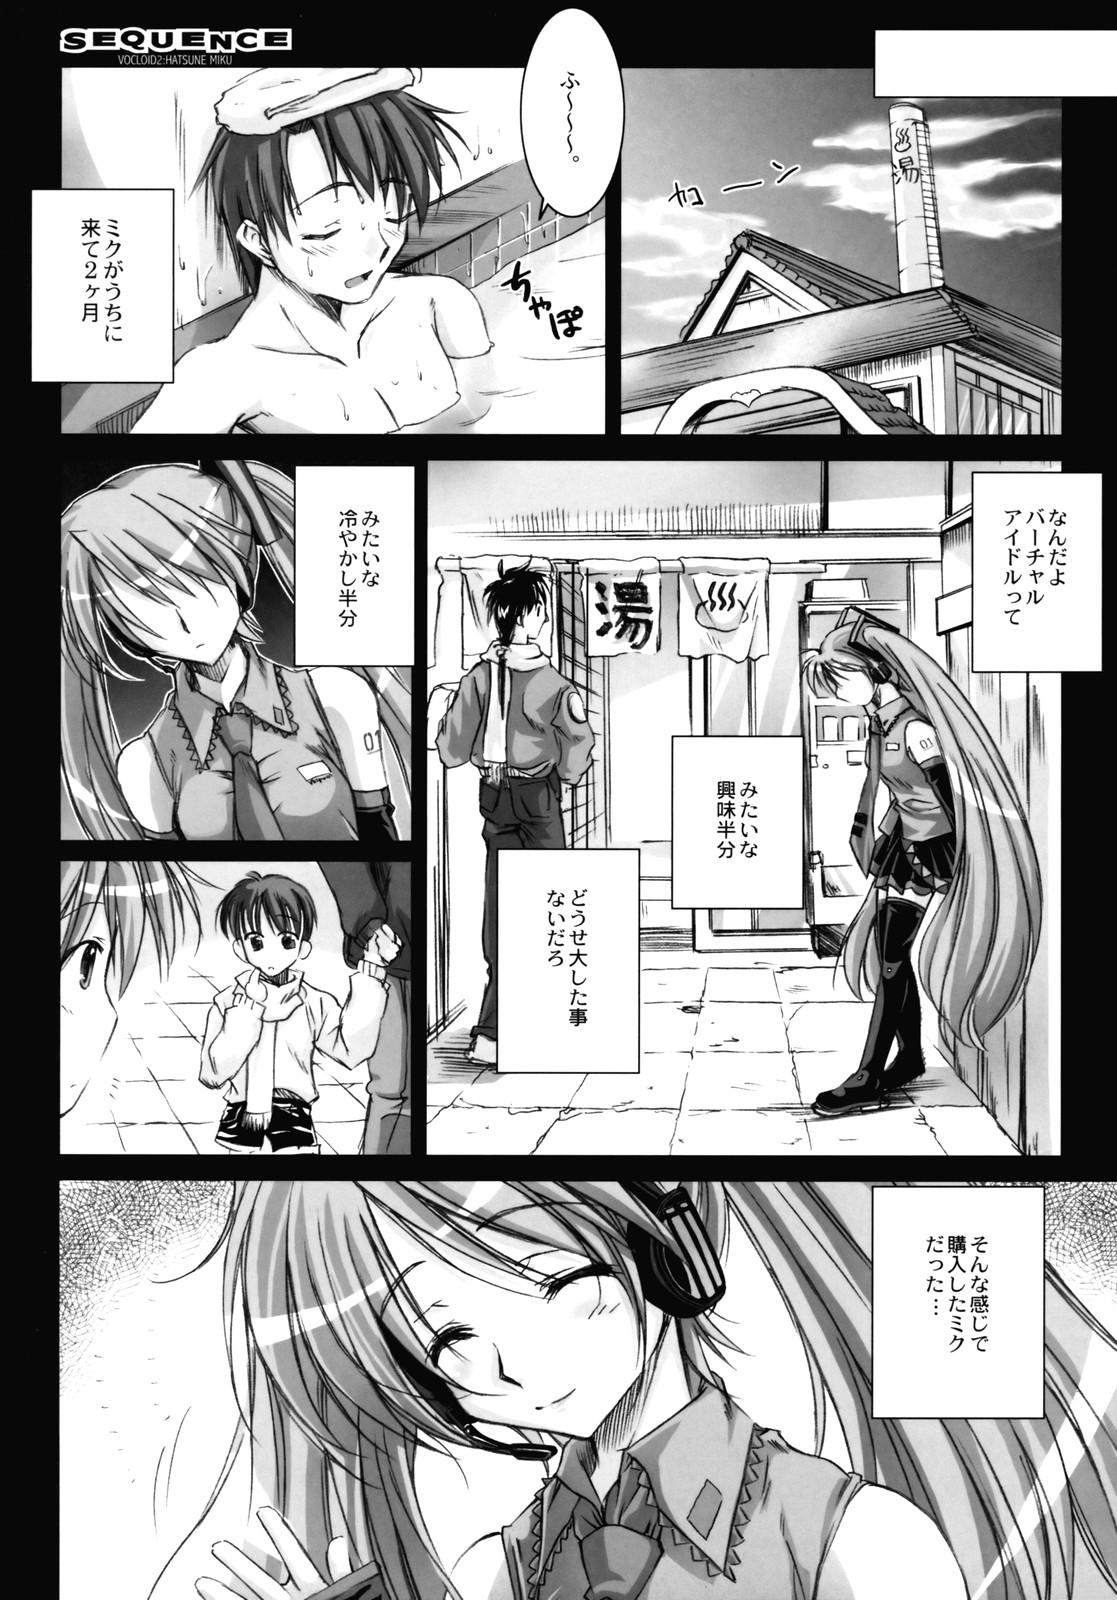 Bokep SEQUENCE - Vocaloid Atm - Page 6